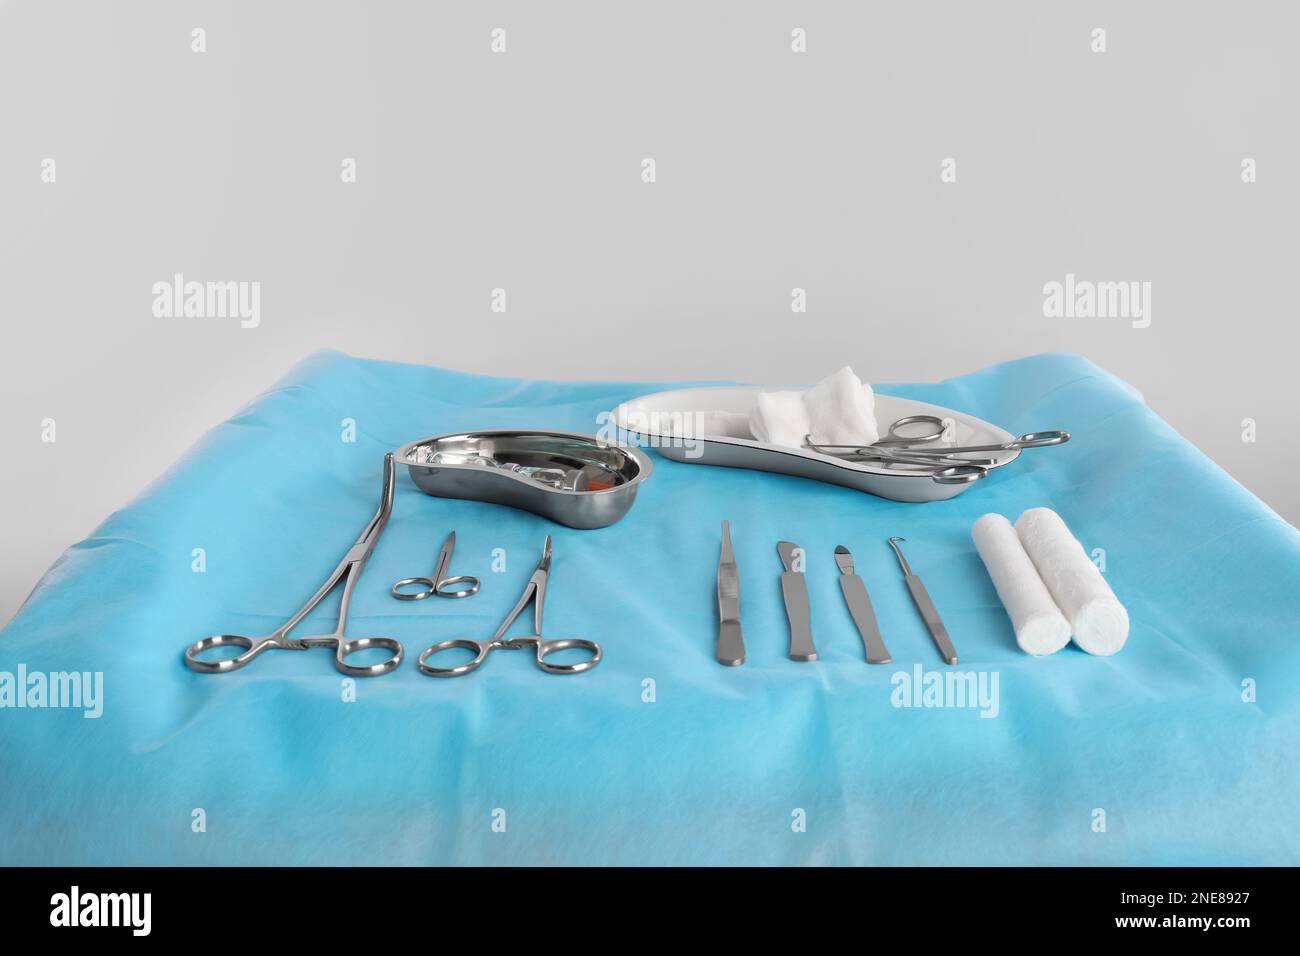 Different surgical instruments on table against light background Stock Photo